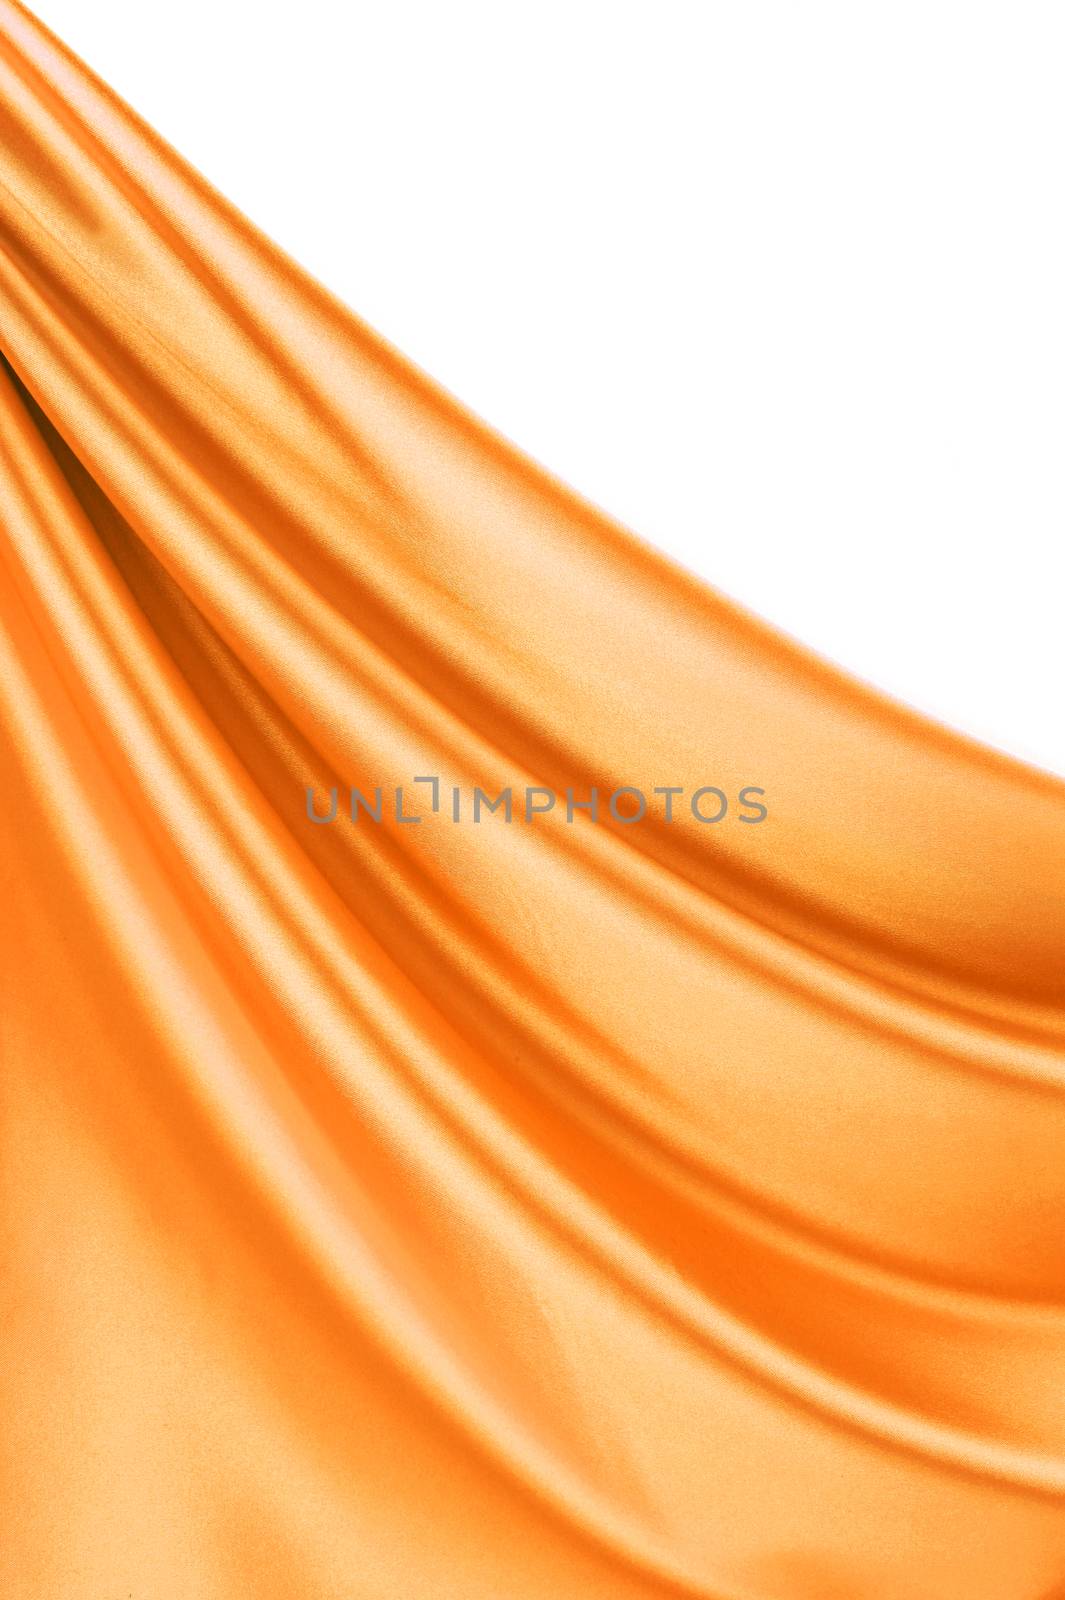 Golden satin. Located on a white background.